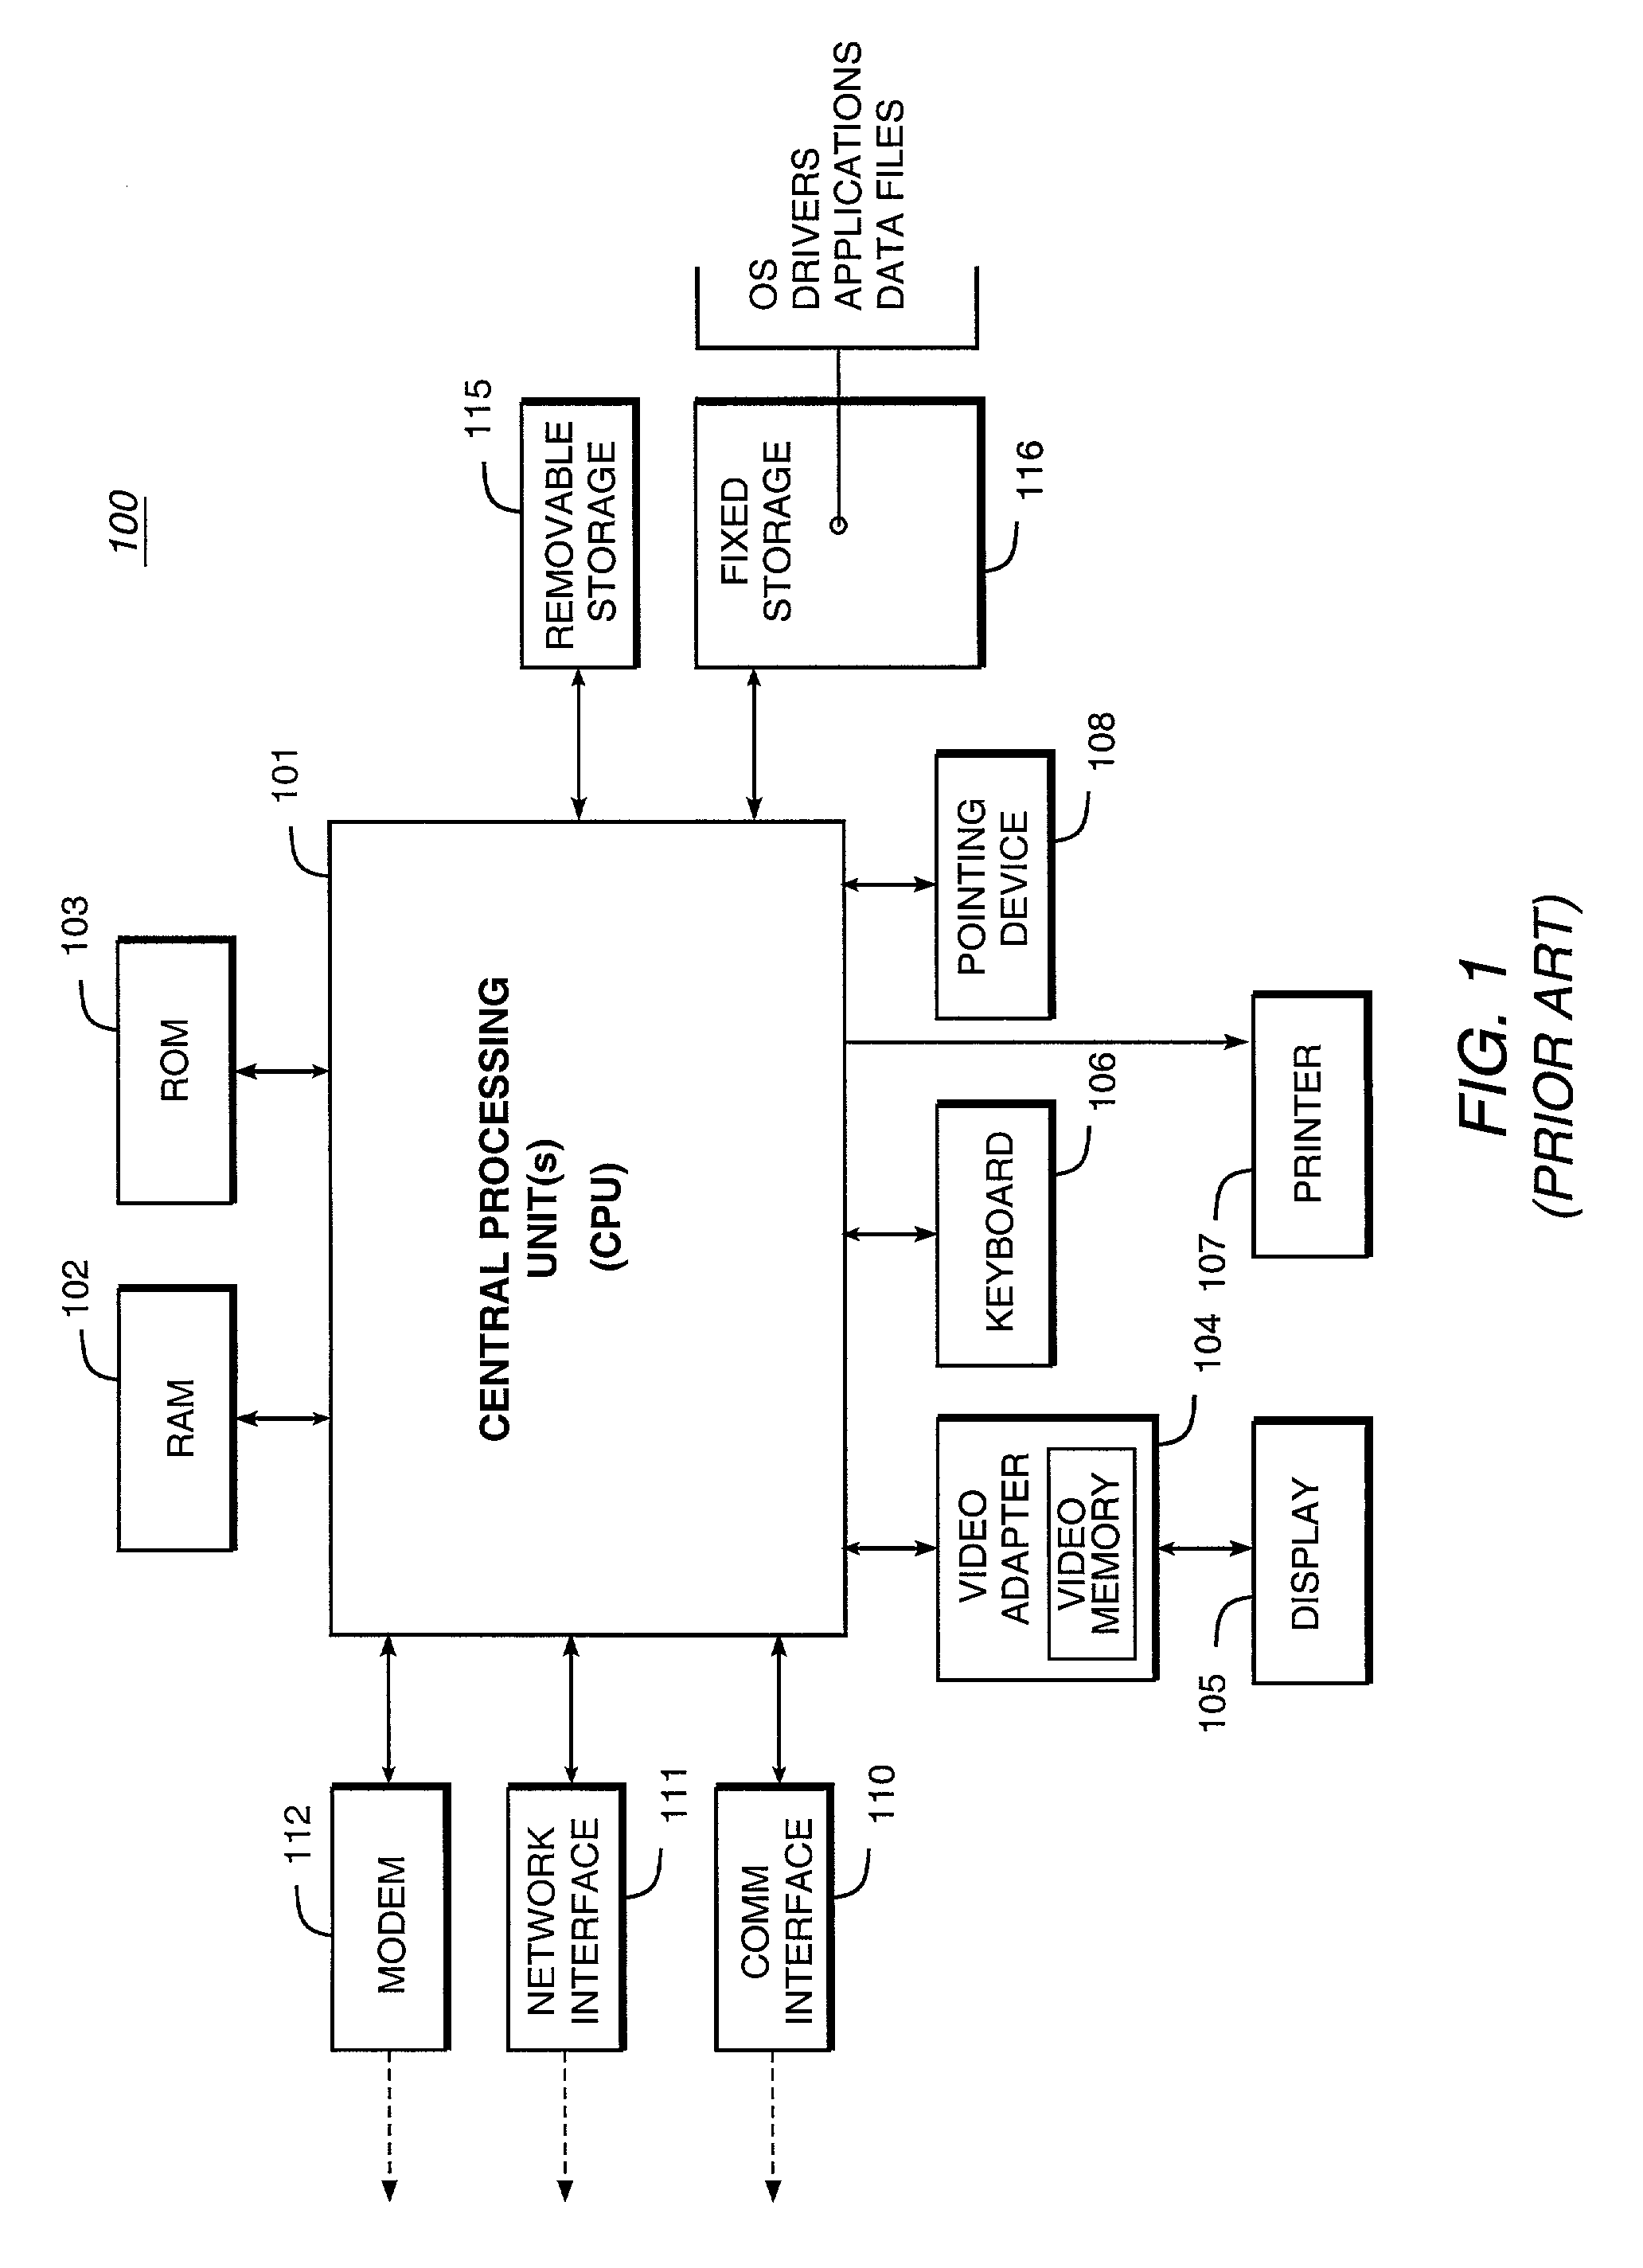 Database system providing optimization of group by operator over a union all